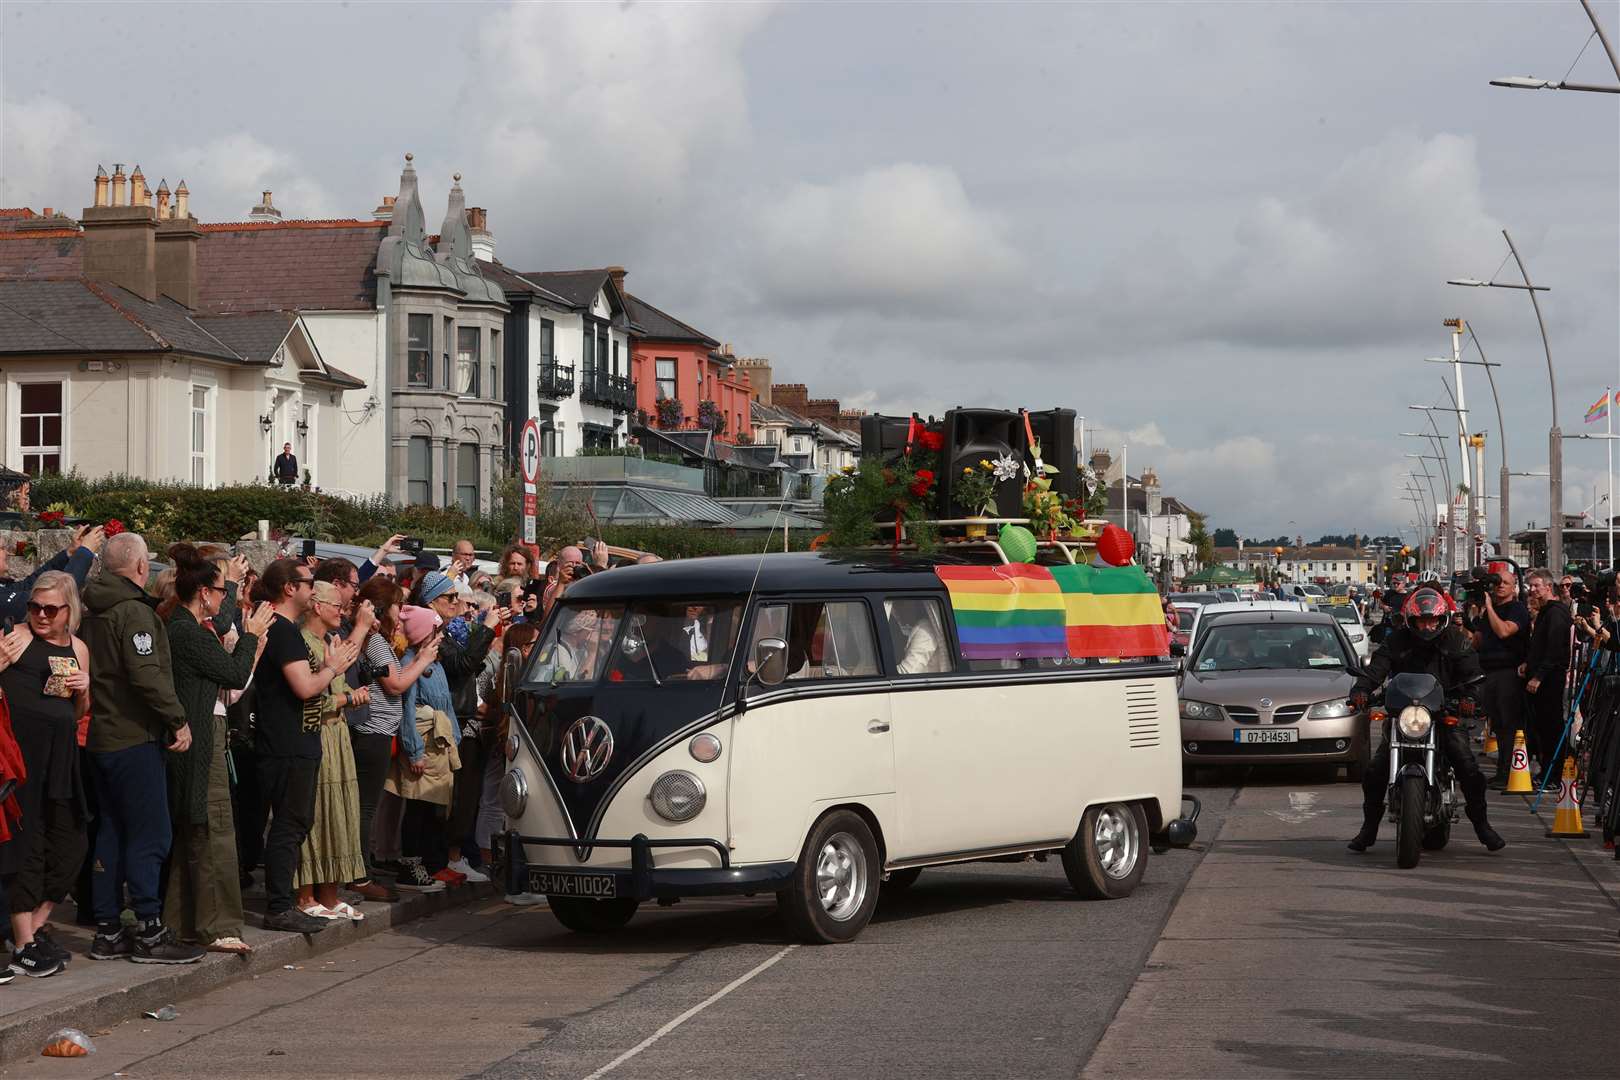 A Volkswagen camper van played some of Sinead O’Connor’s songs as crowds gathered (Liam McBurney/PA)